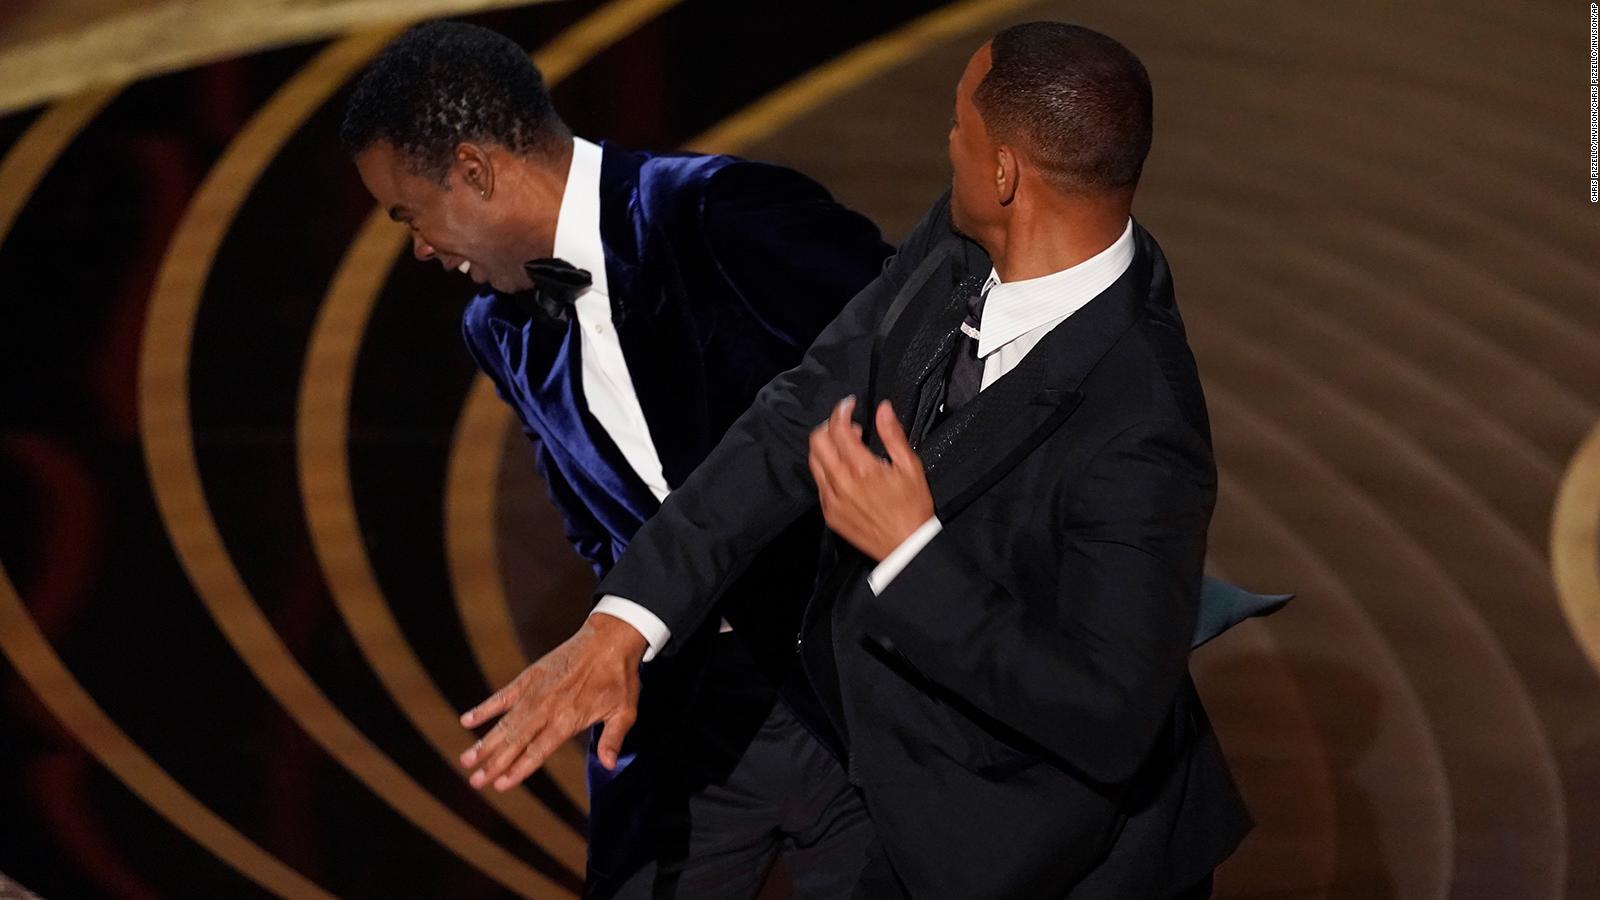 Producer Chris Rock has said he does not want Will Smith out of the Oscars.